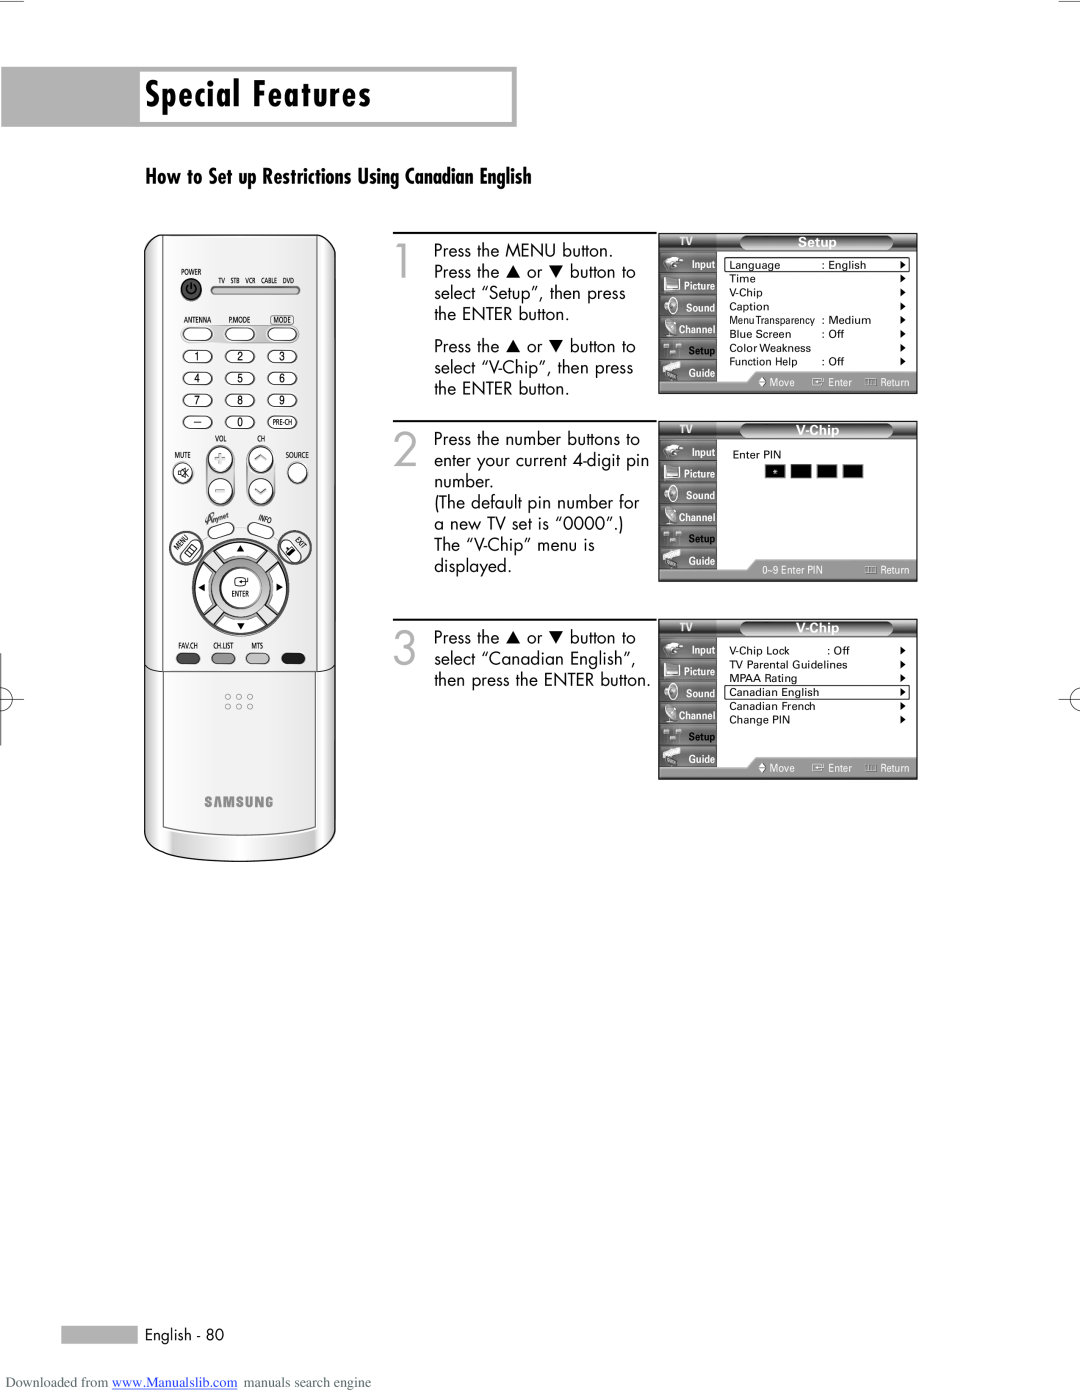 Samsung HL-R5056W, HL-R6156W, HL-R5656W manual Special Features, How to Set up Restrictions Using Canadian English 